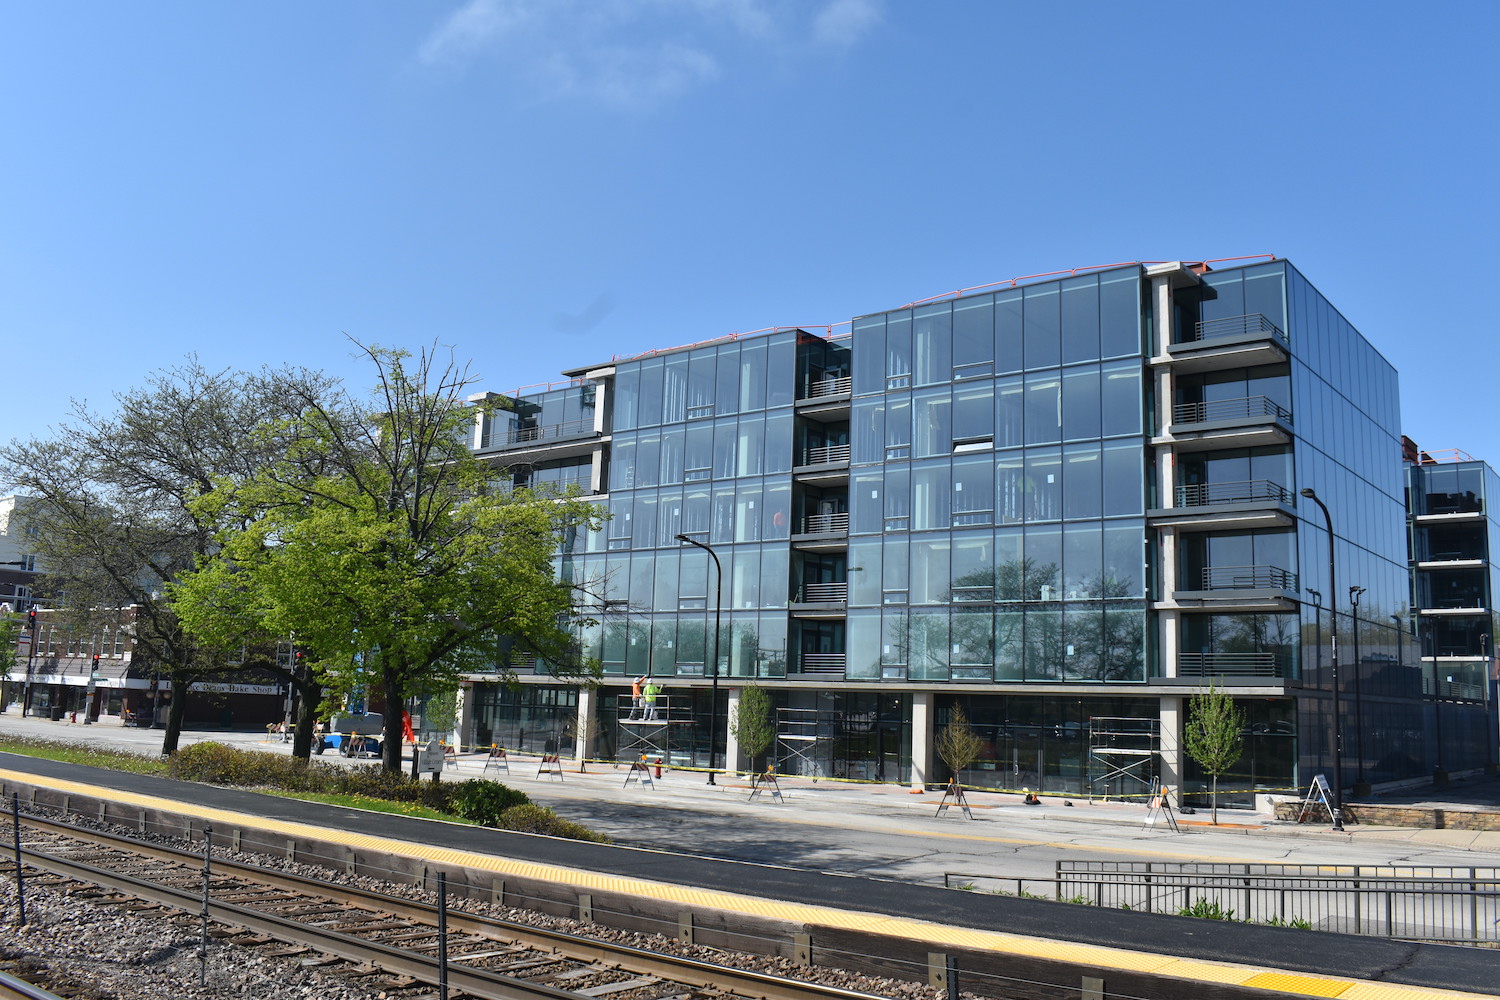 Inside 6-story Optima Verdana apartment complex, which is close to completion in Wilmette